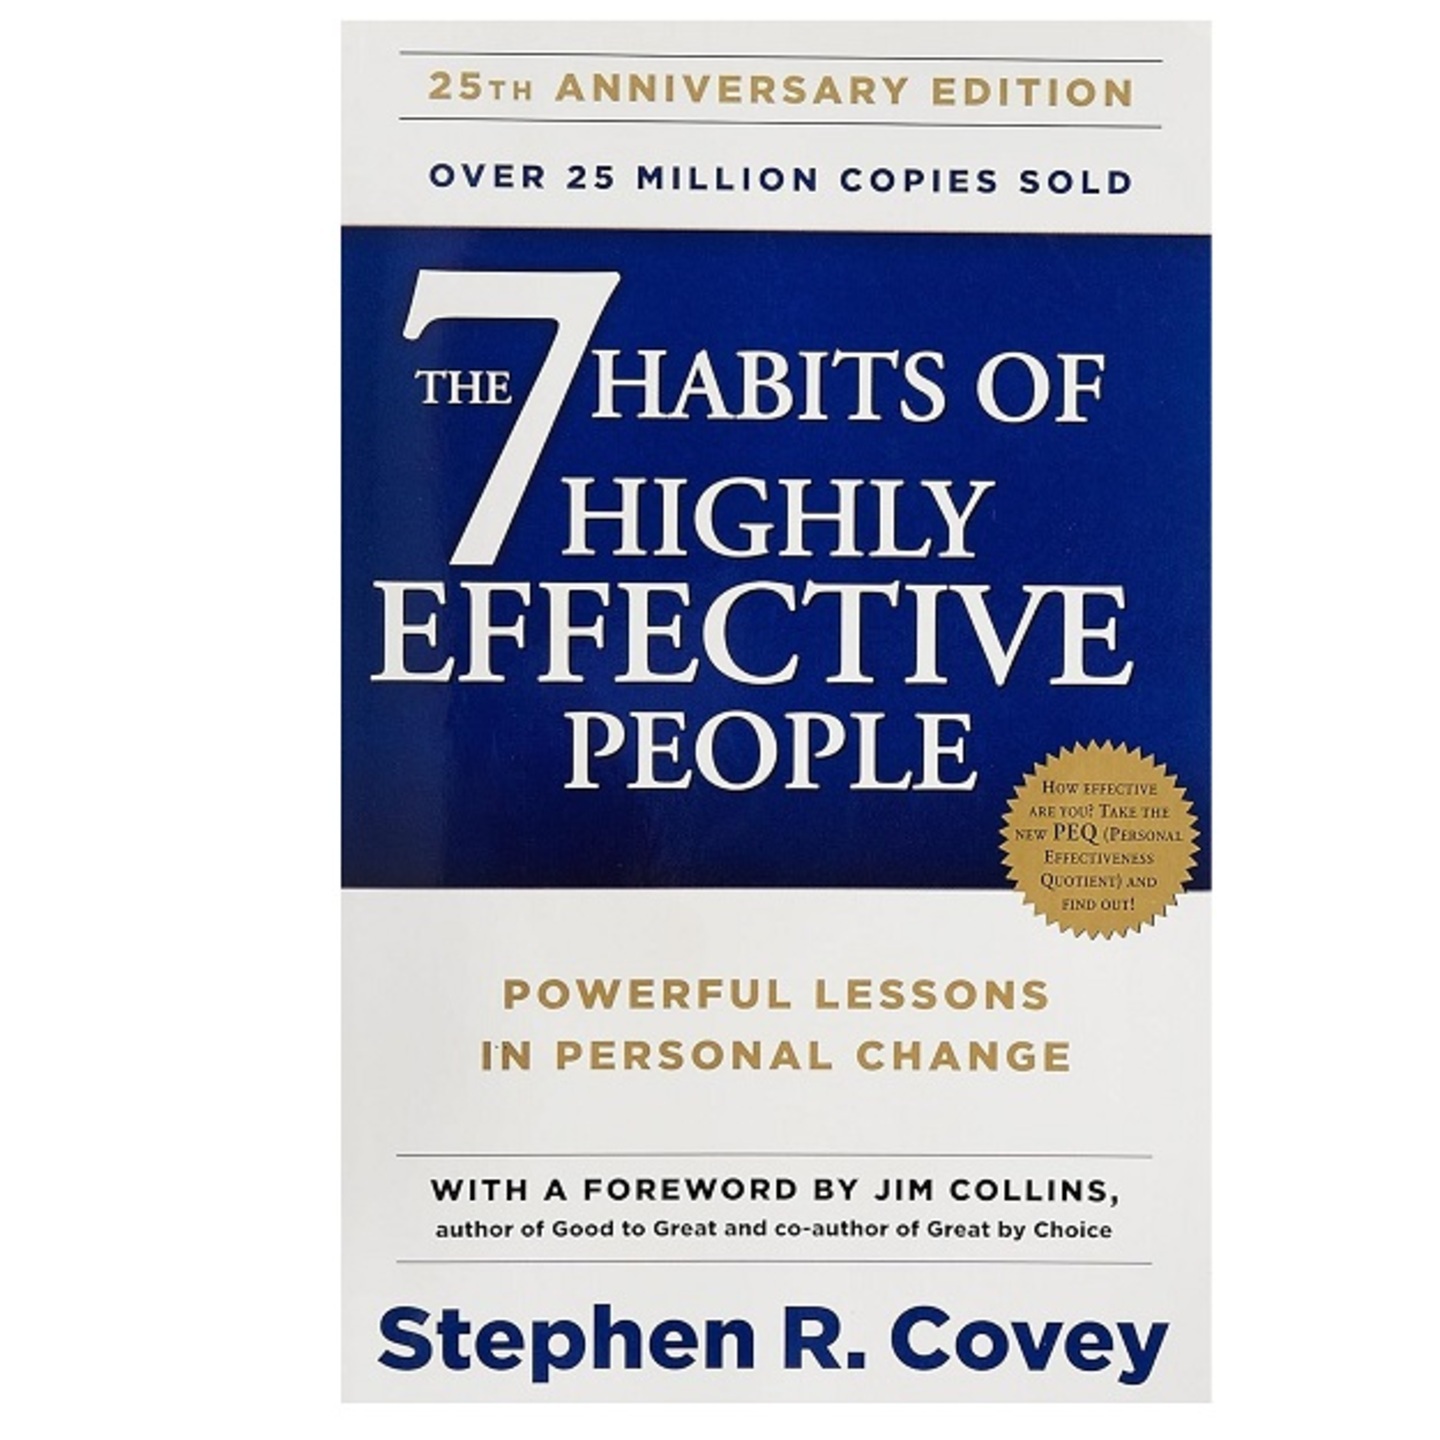 Book The 7 Habits of Highly Effective People